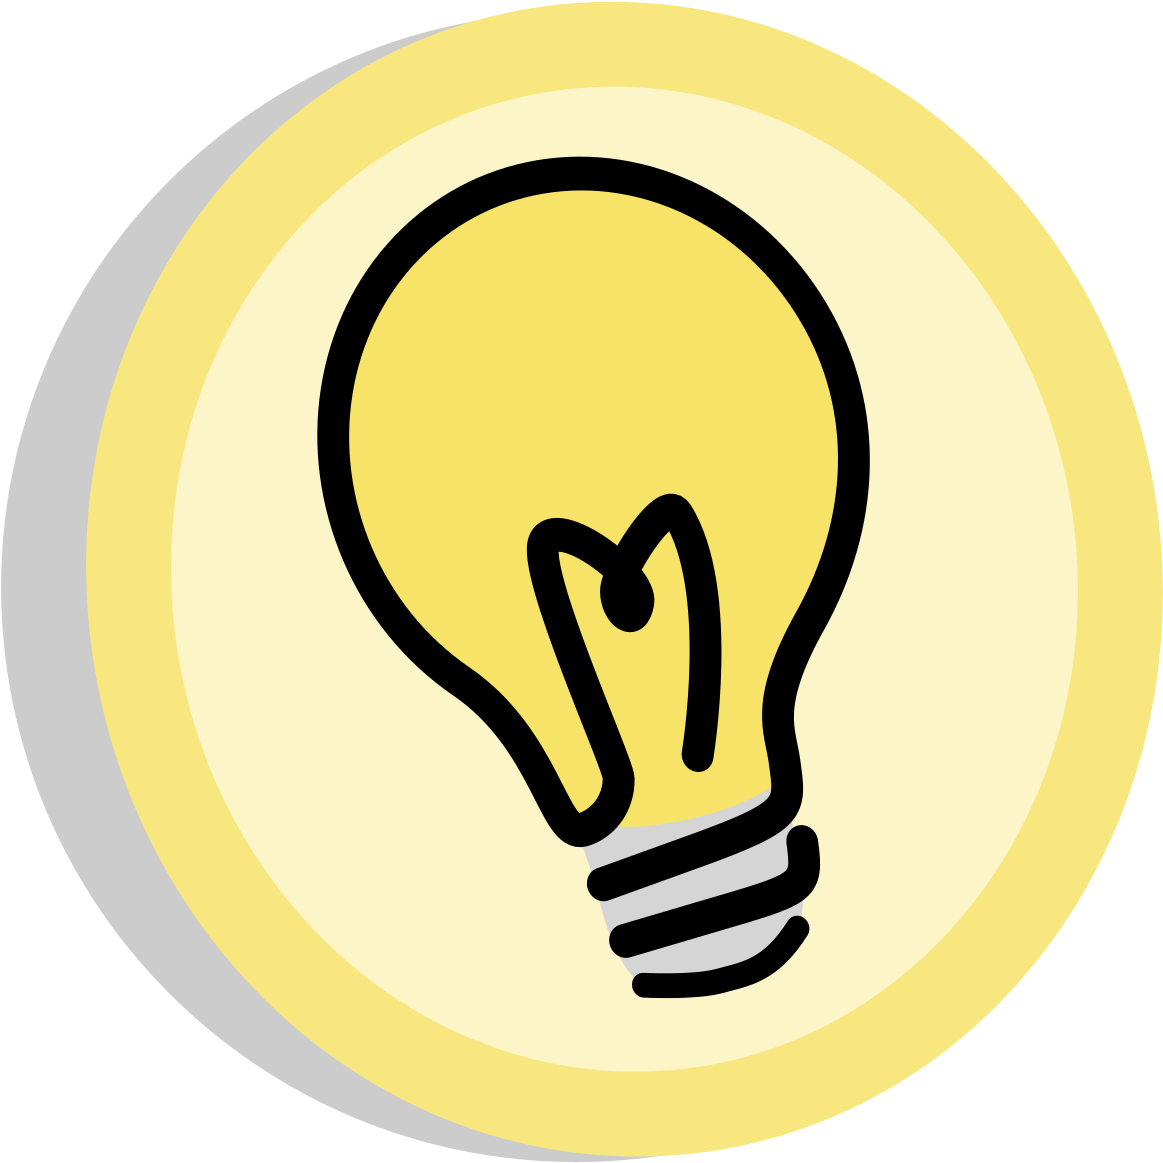 A Yellow Light Bulb With Black Outline